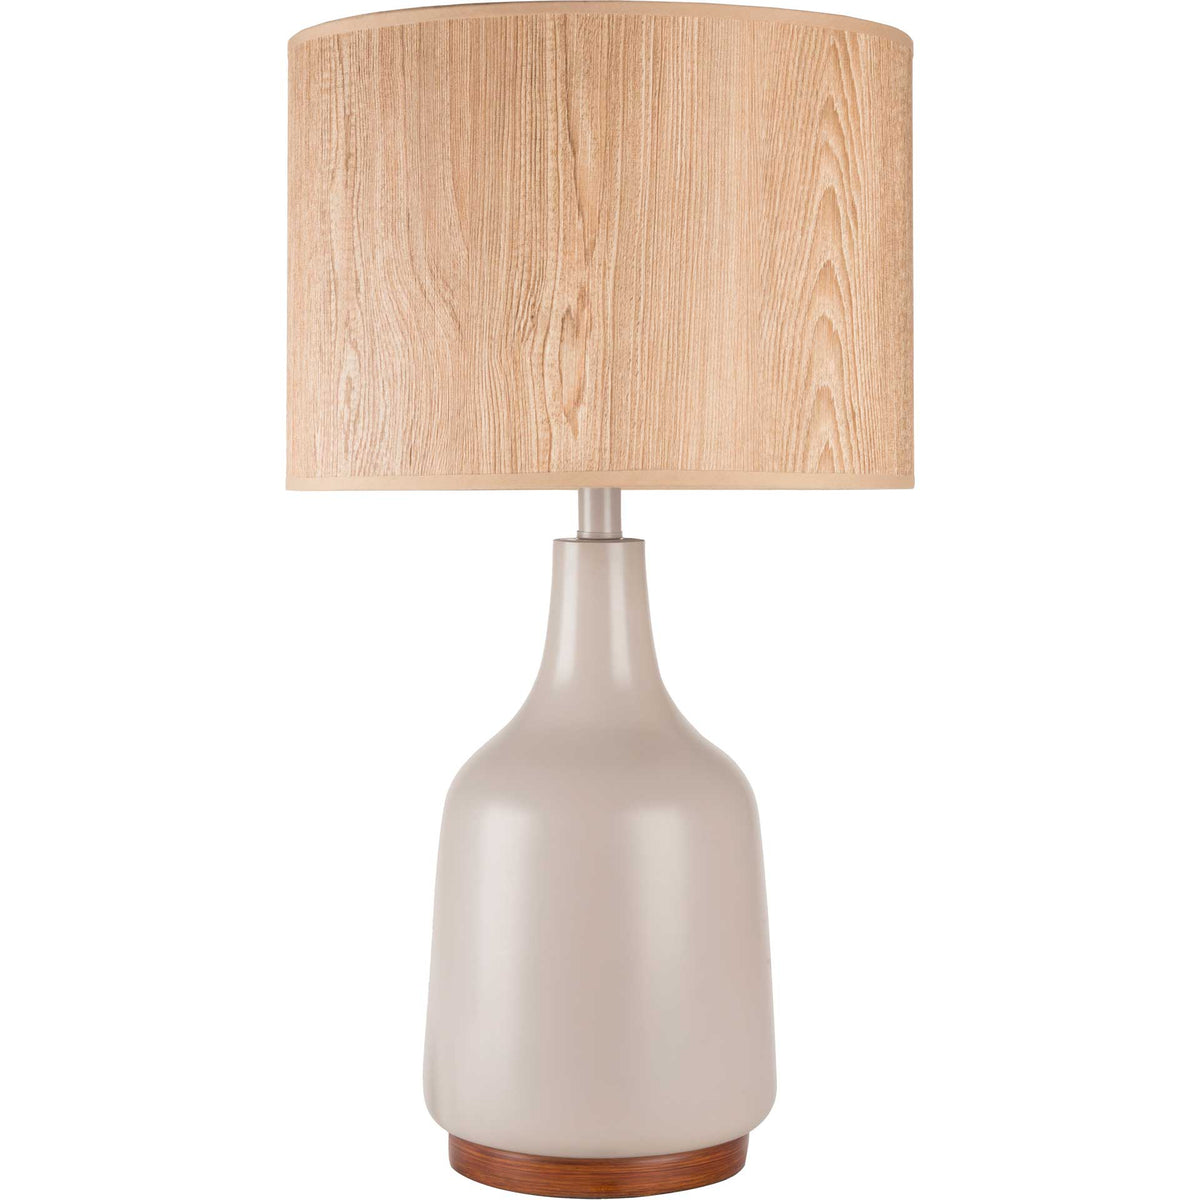 Alayna Table Lamp Ivory/Wheat/Taupe - Froy.com